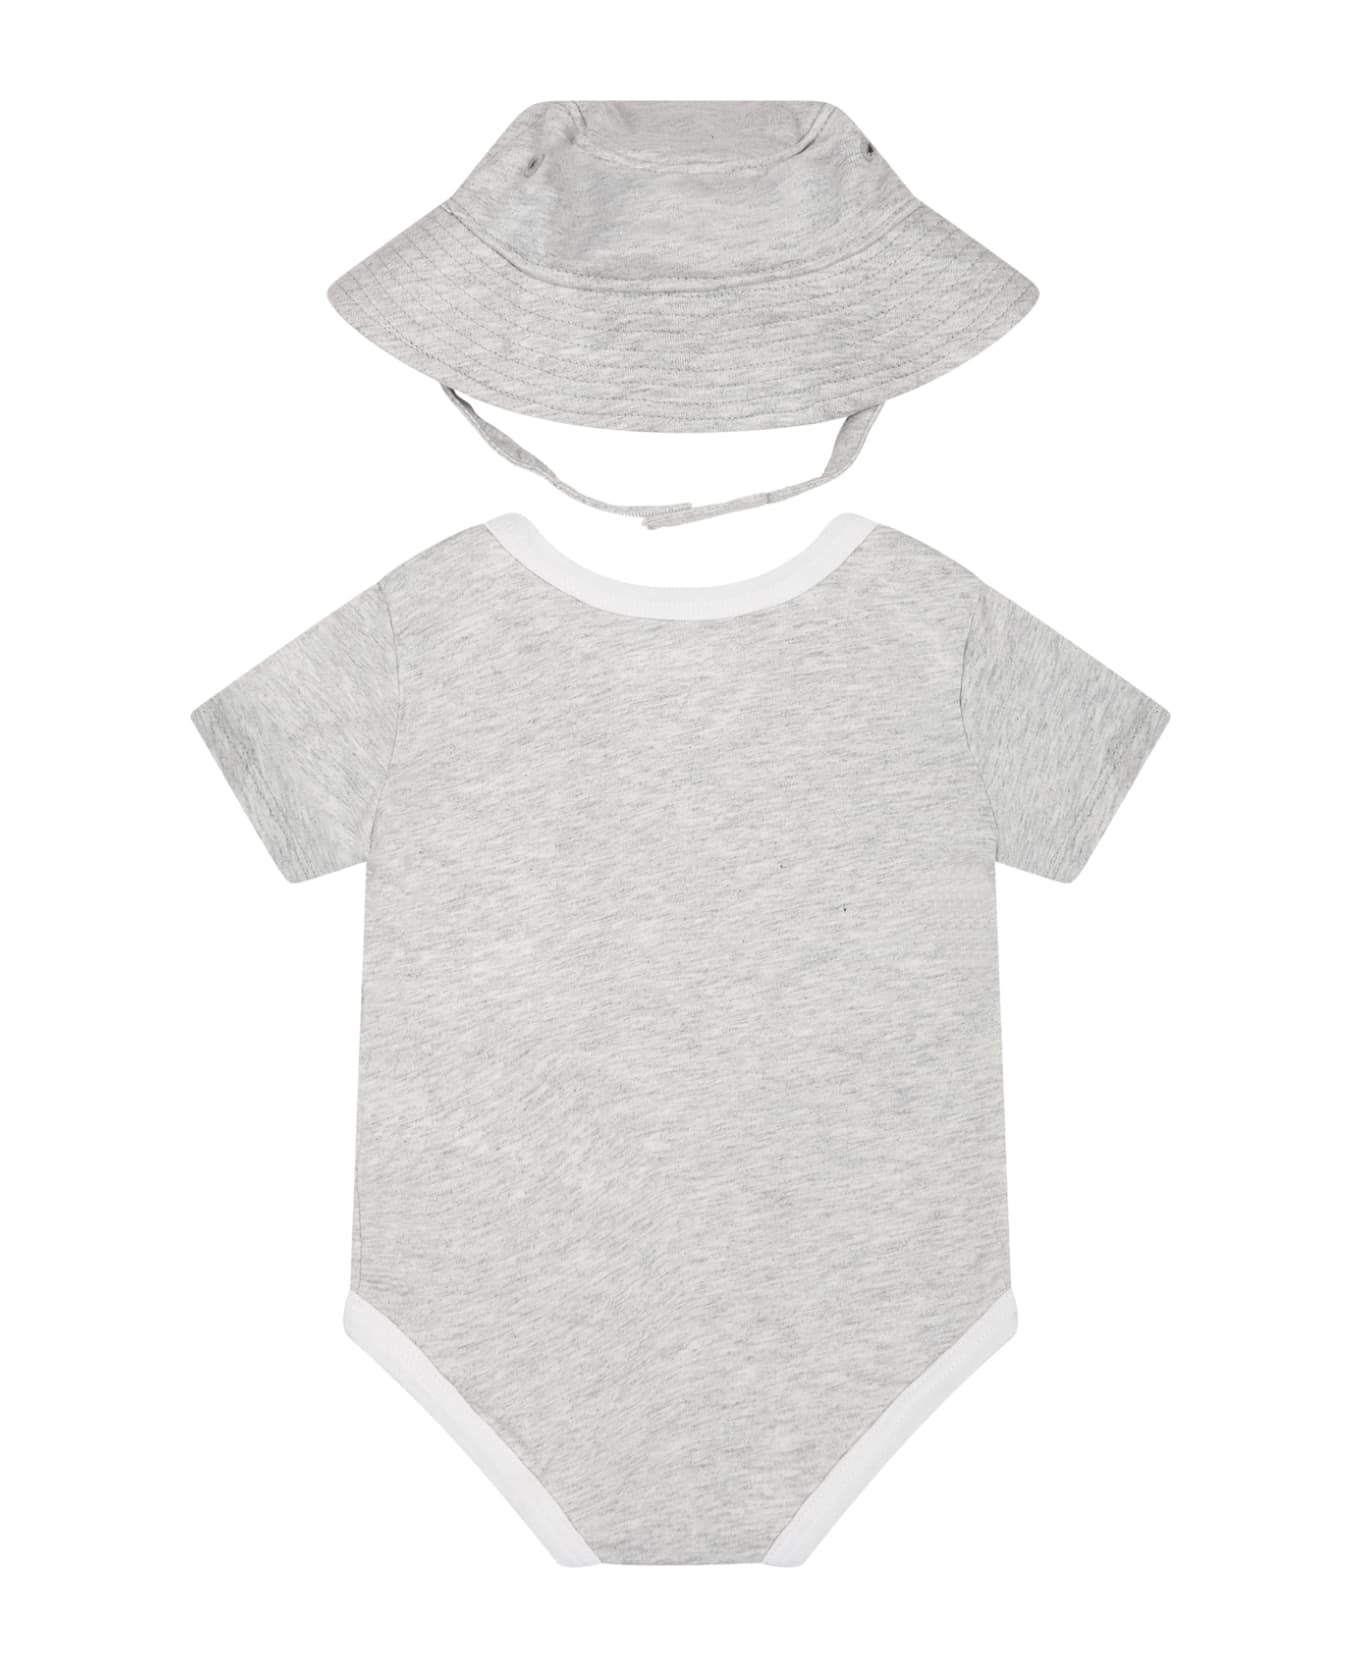 Nike Grey Set For Baby Kids With Logo - Grey ボディスーツ＆セットアップ